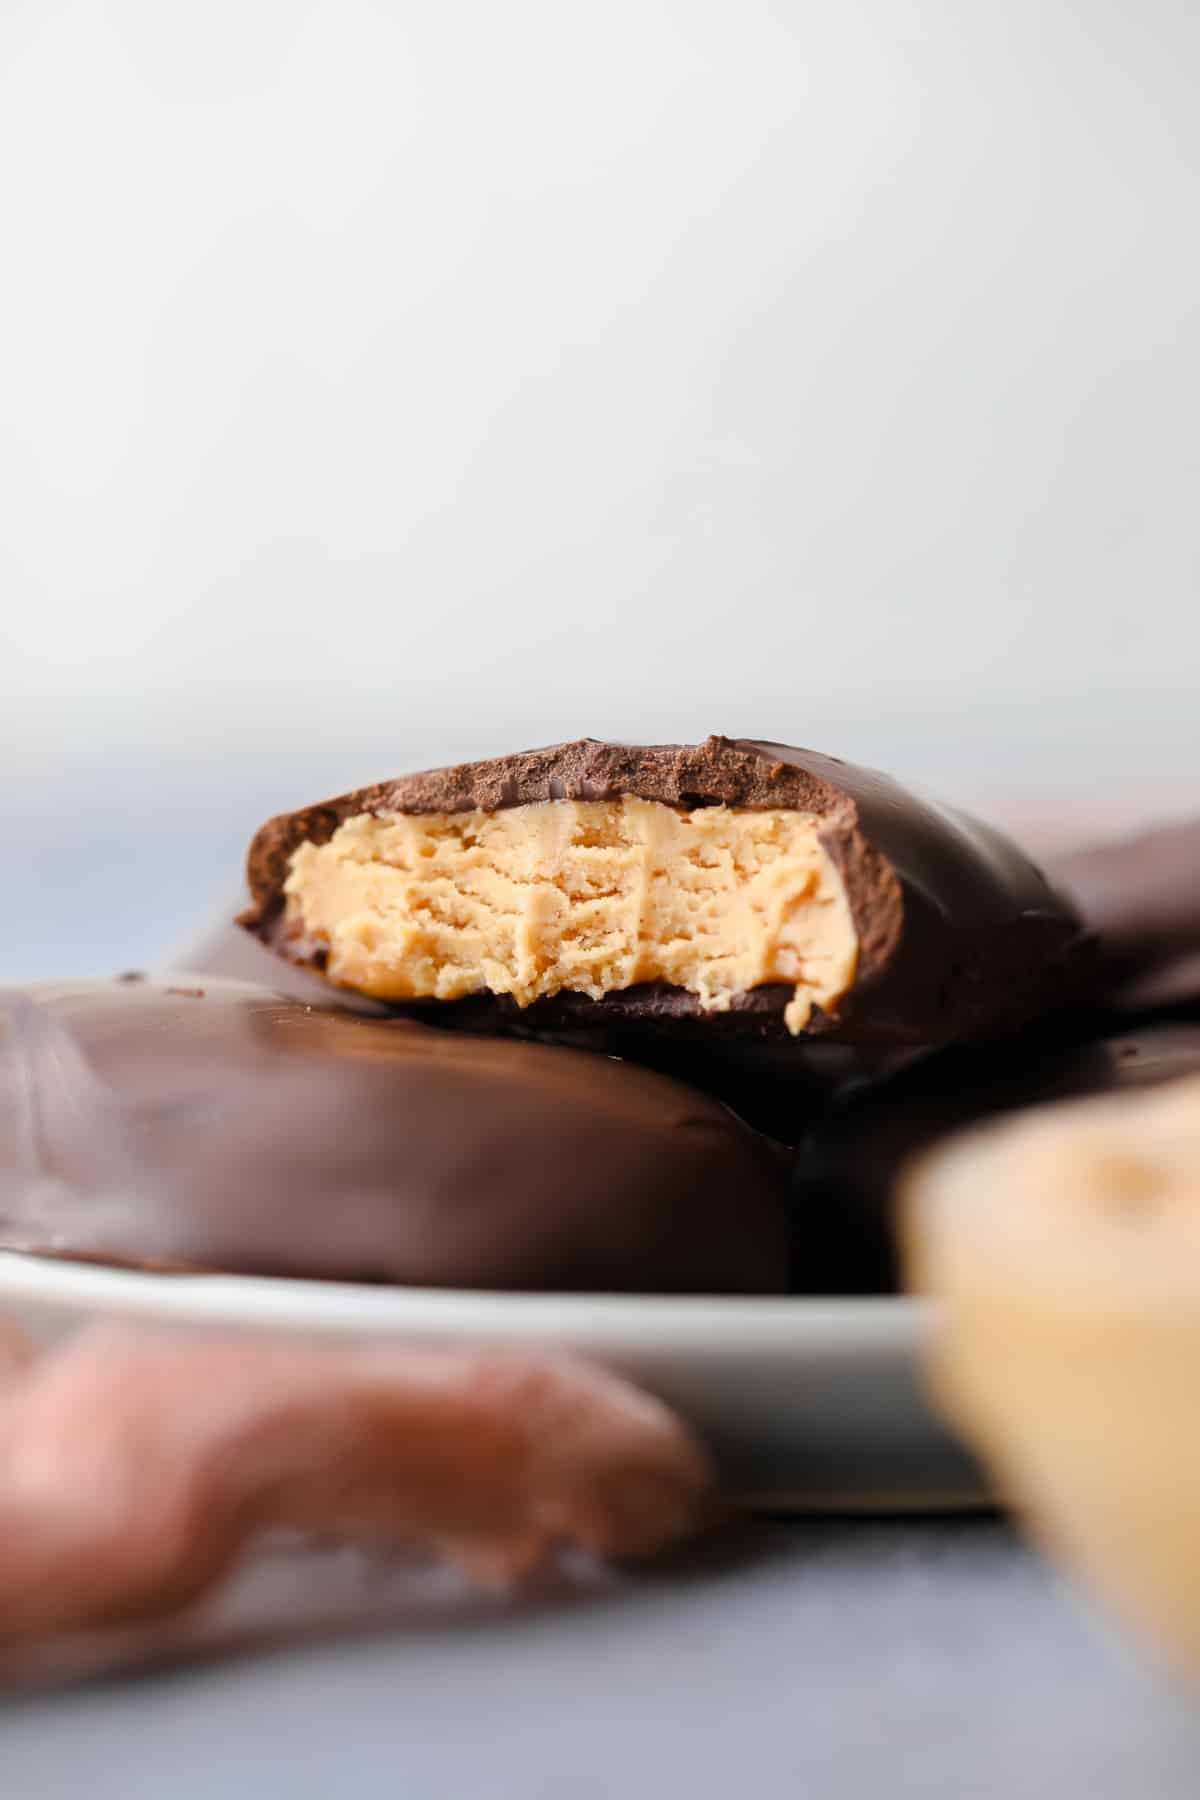 close up of peanut butter egg with a bite taken, showing peanut butter inside, on grey background